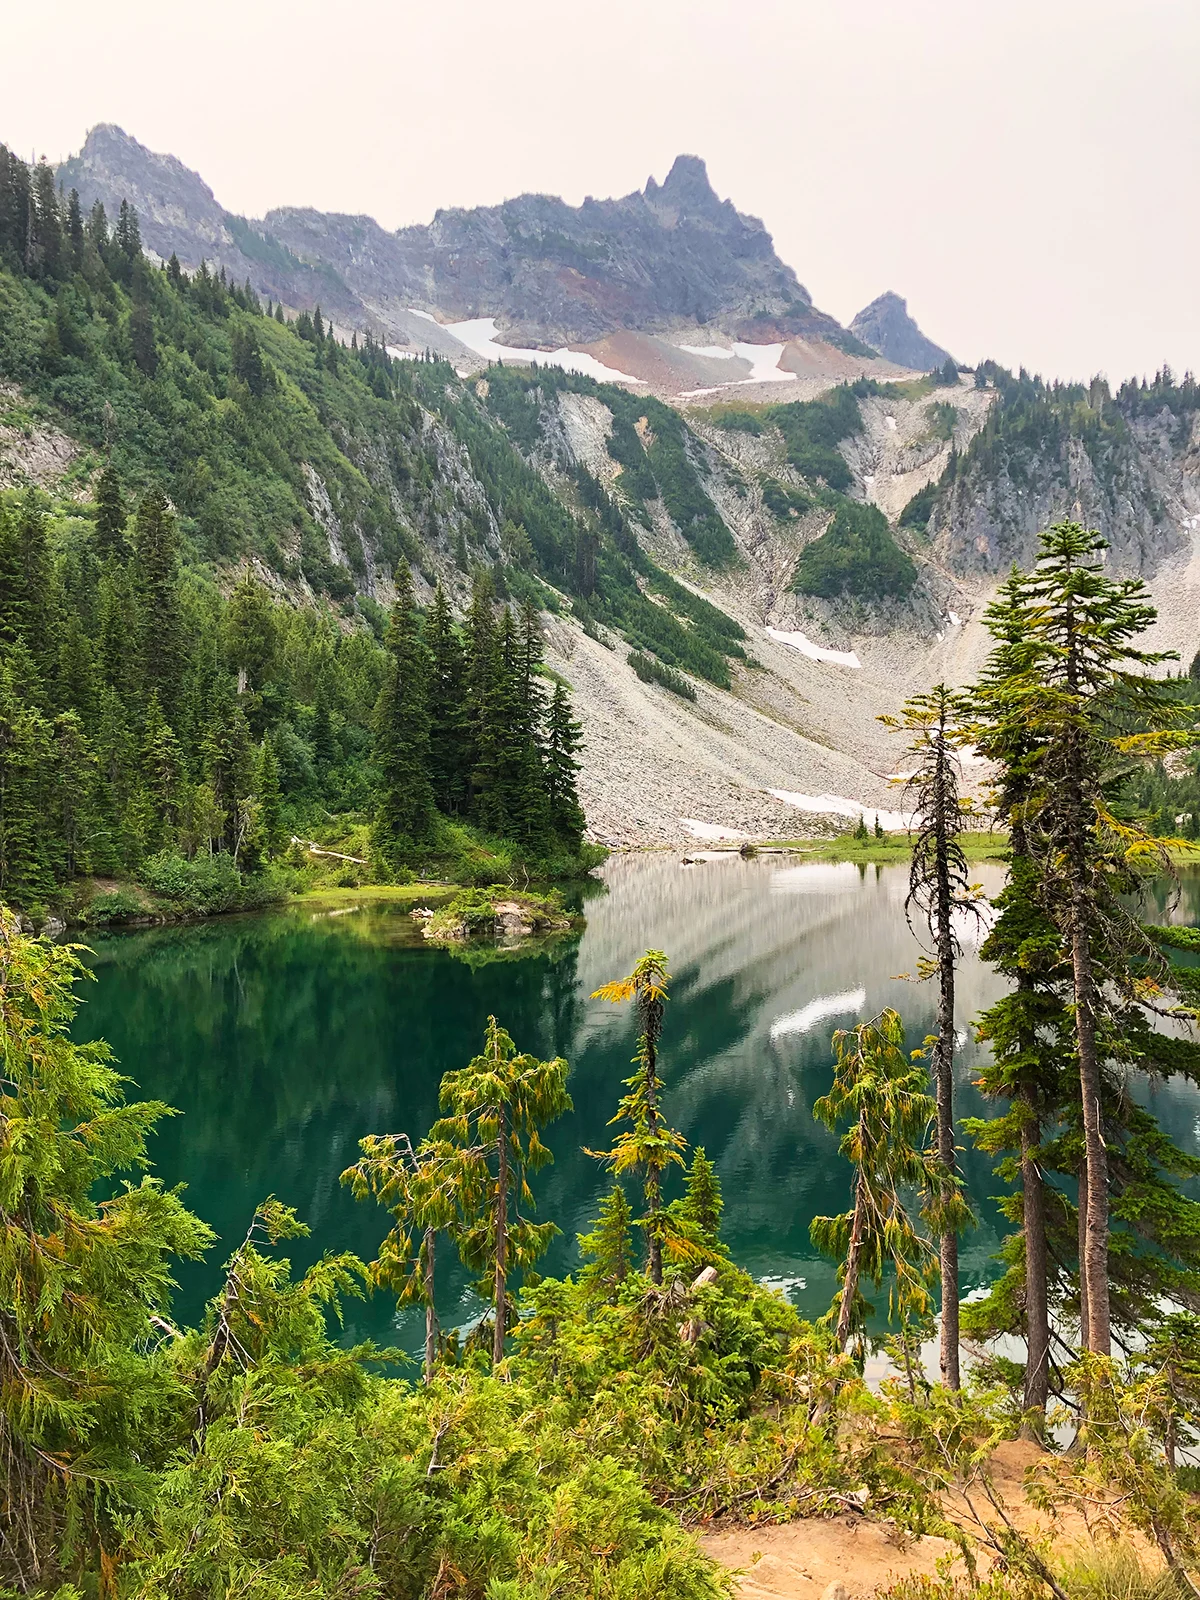 things to do in mount rainier visit snow lake view of trees and green lake with mountain in distance